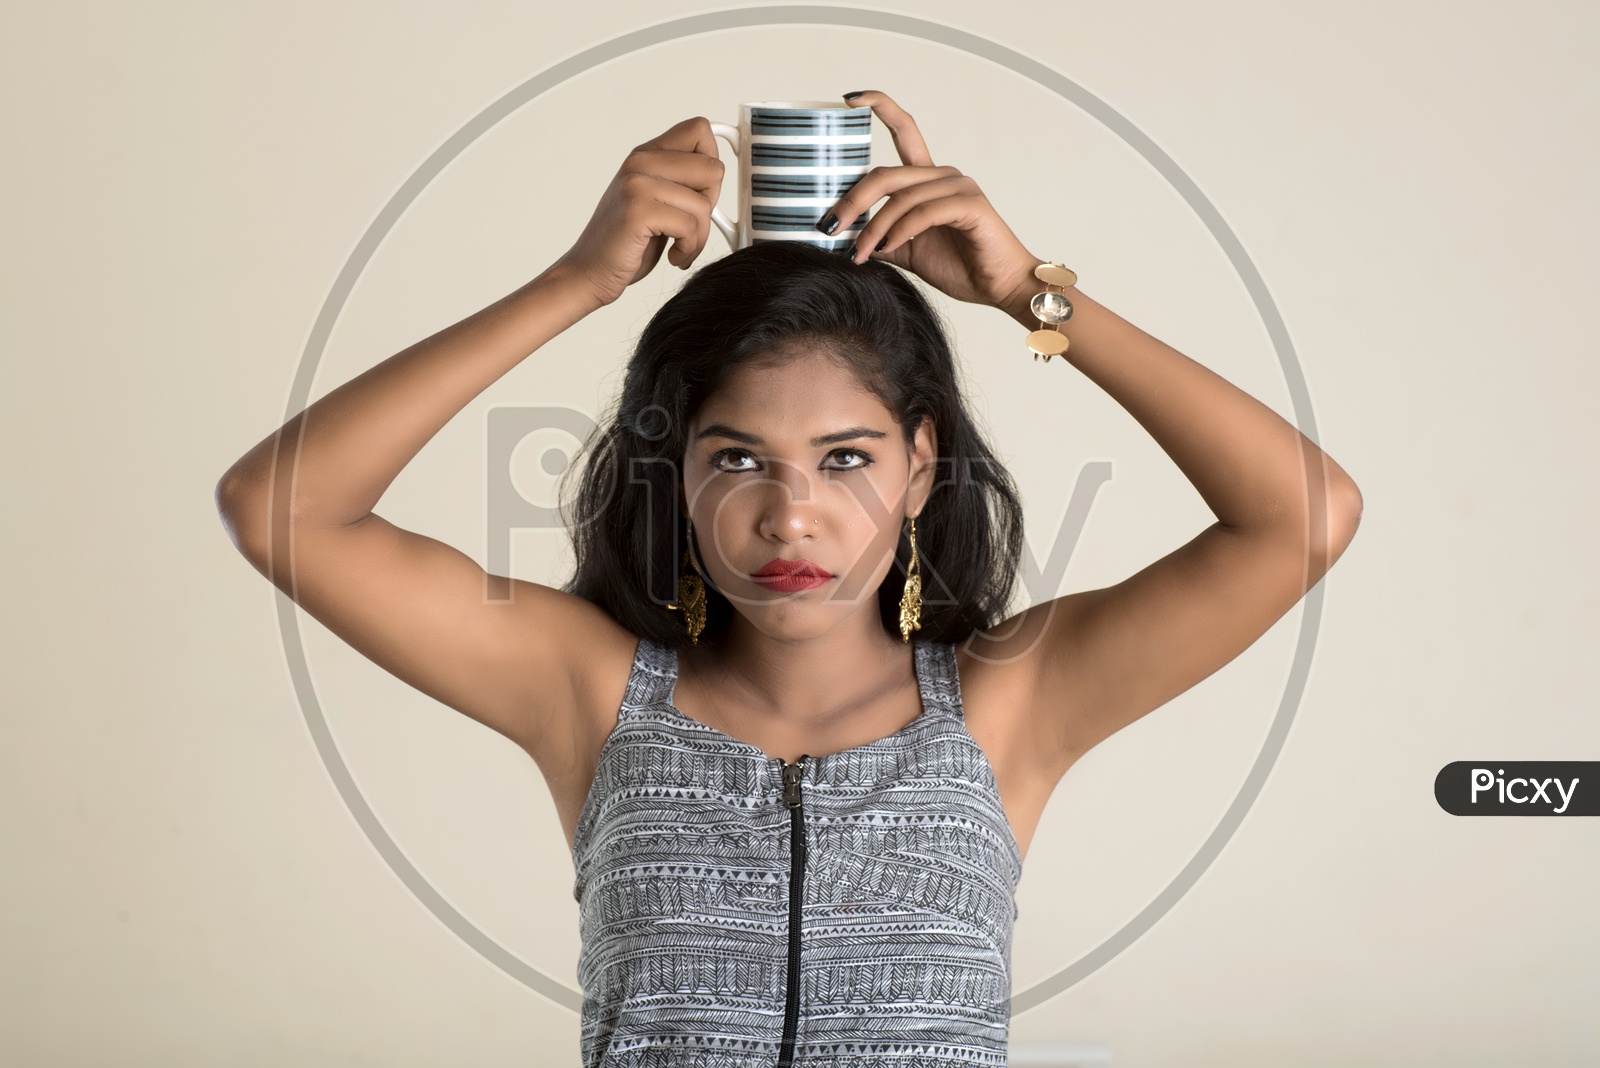 Indian woman holding a mug on her head